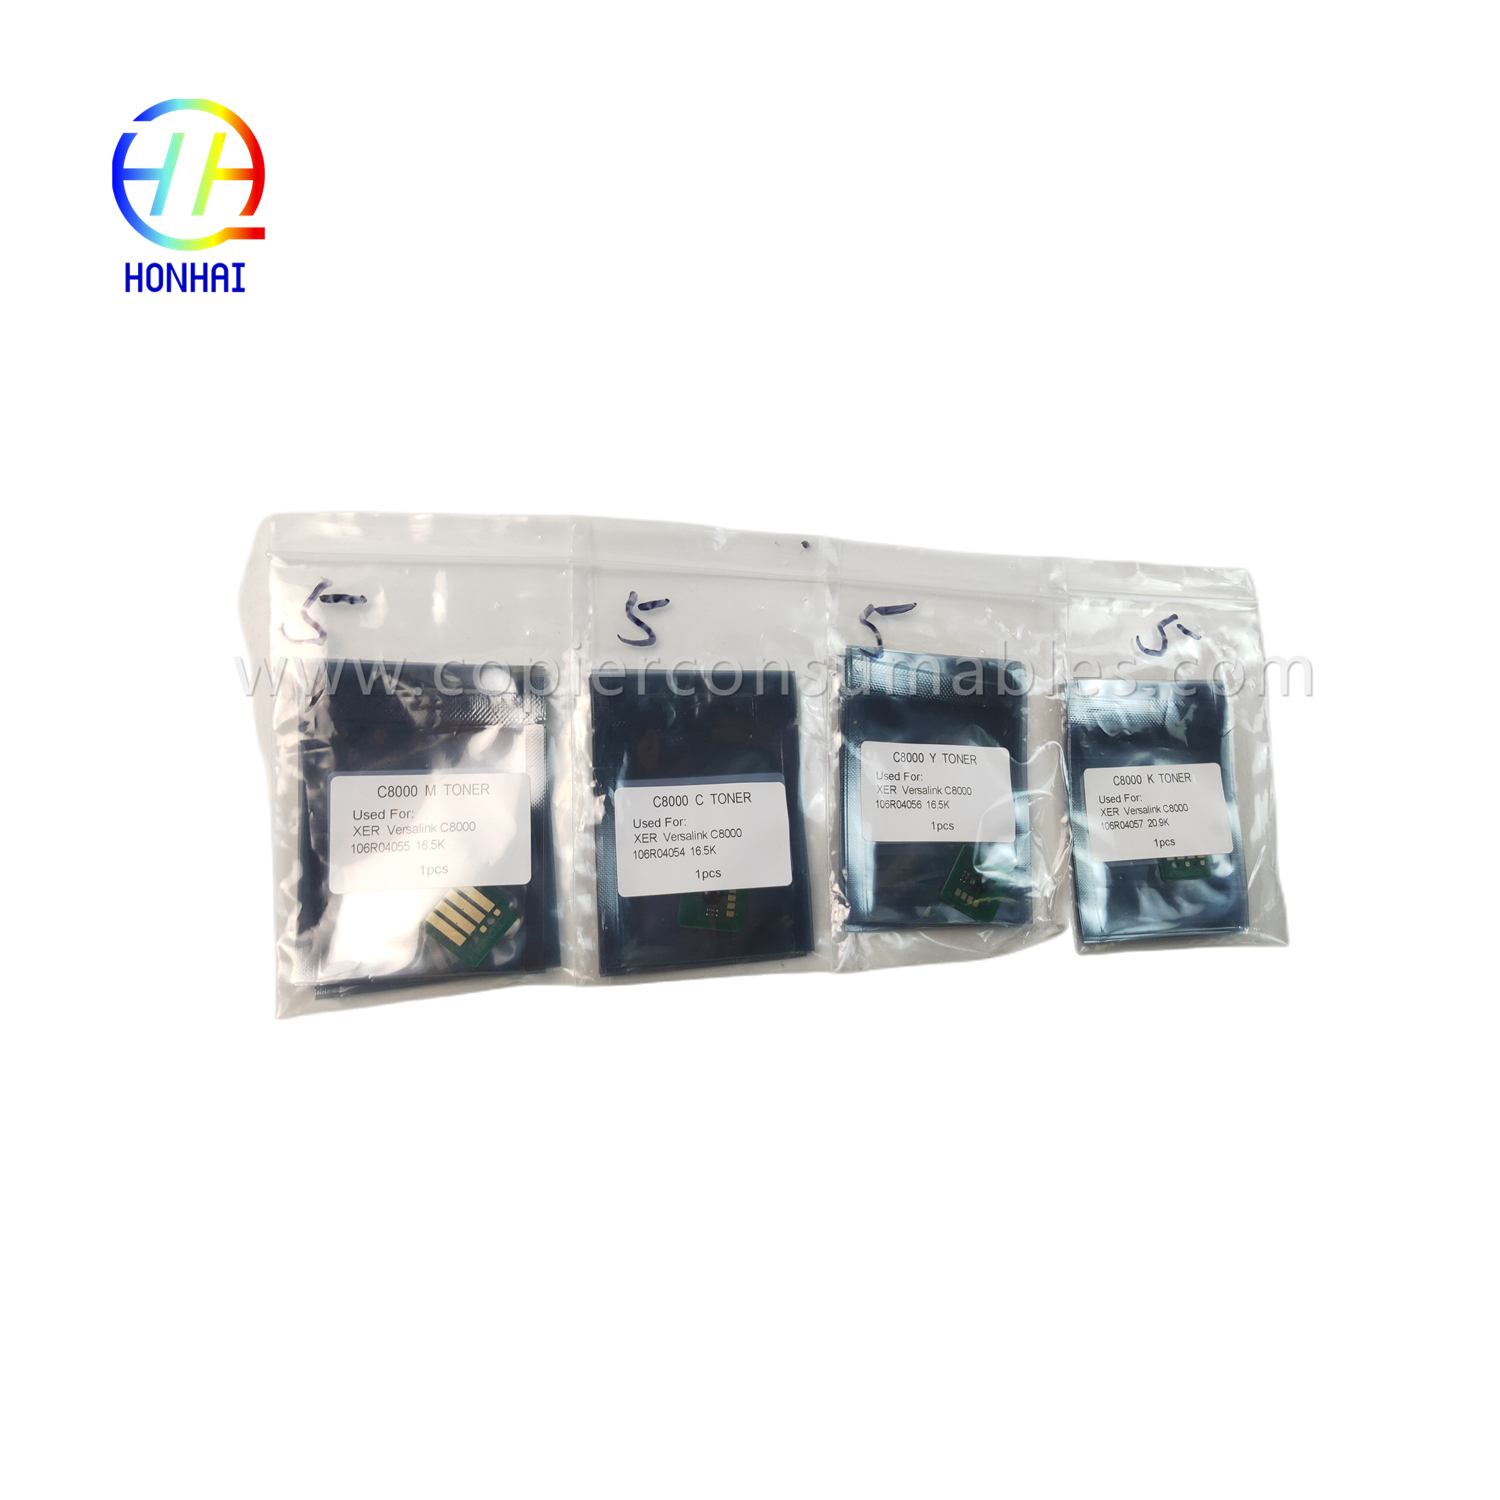 Toner Cartridge Chip for Xerox VersaLink C8000 C8000W C 8000 8000W 106R04057 106R04054 106R04055 106R04056 Color Printer Chips (2)_副本